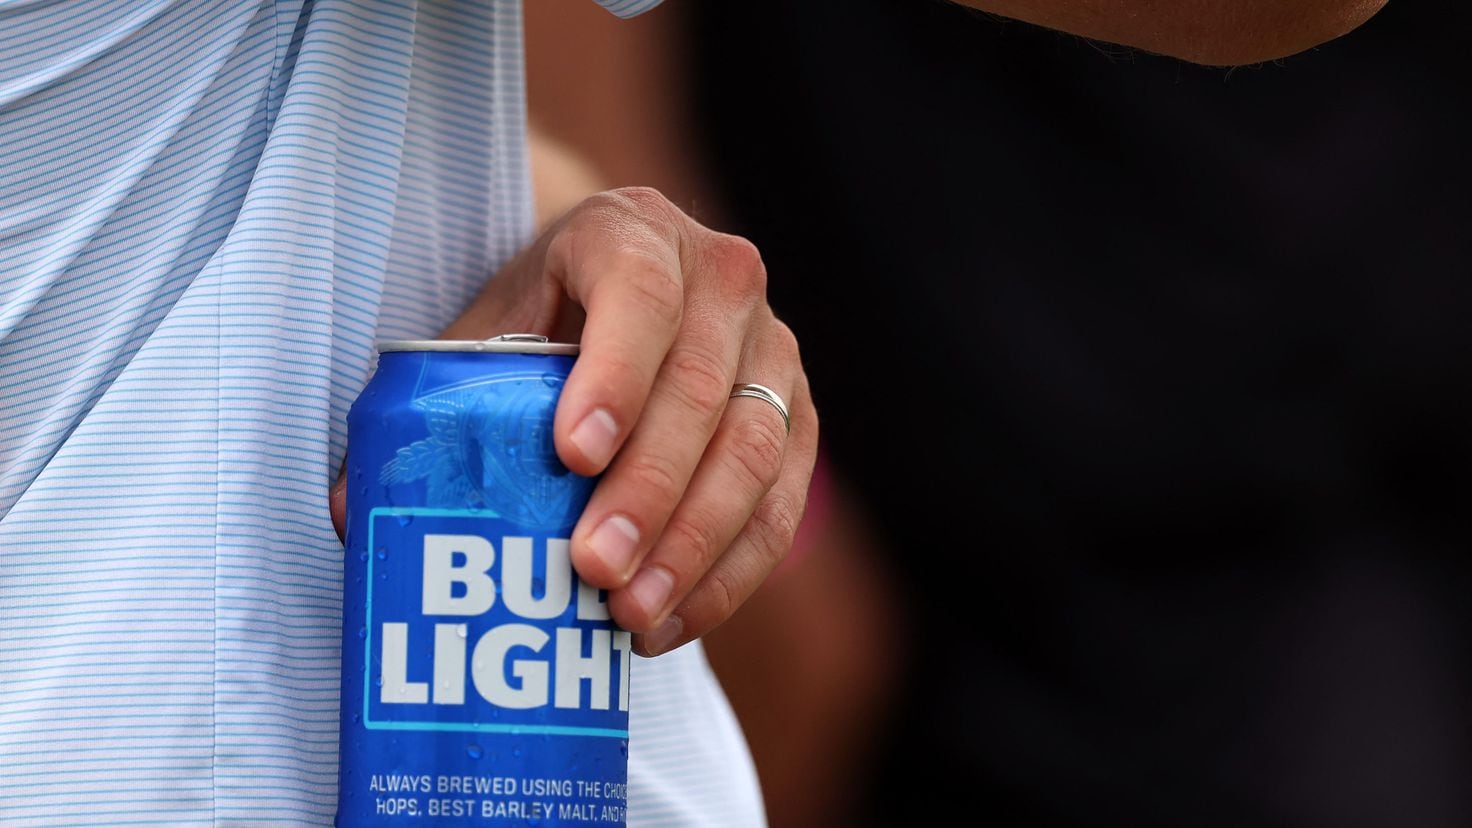 What we know about Captiv8, the ad agency responsible for the Bud Light campaign